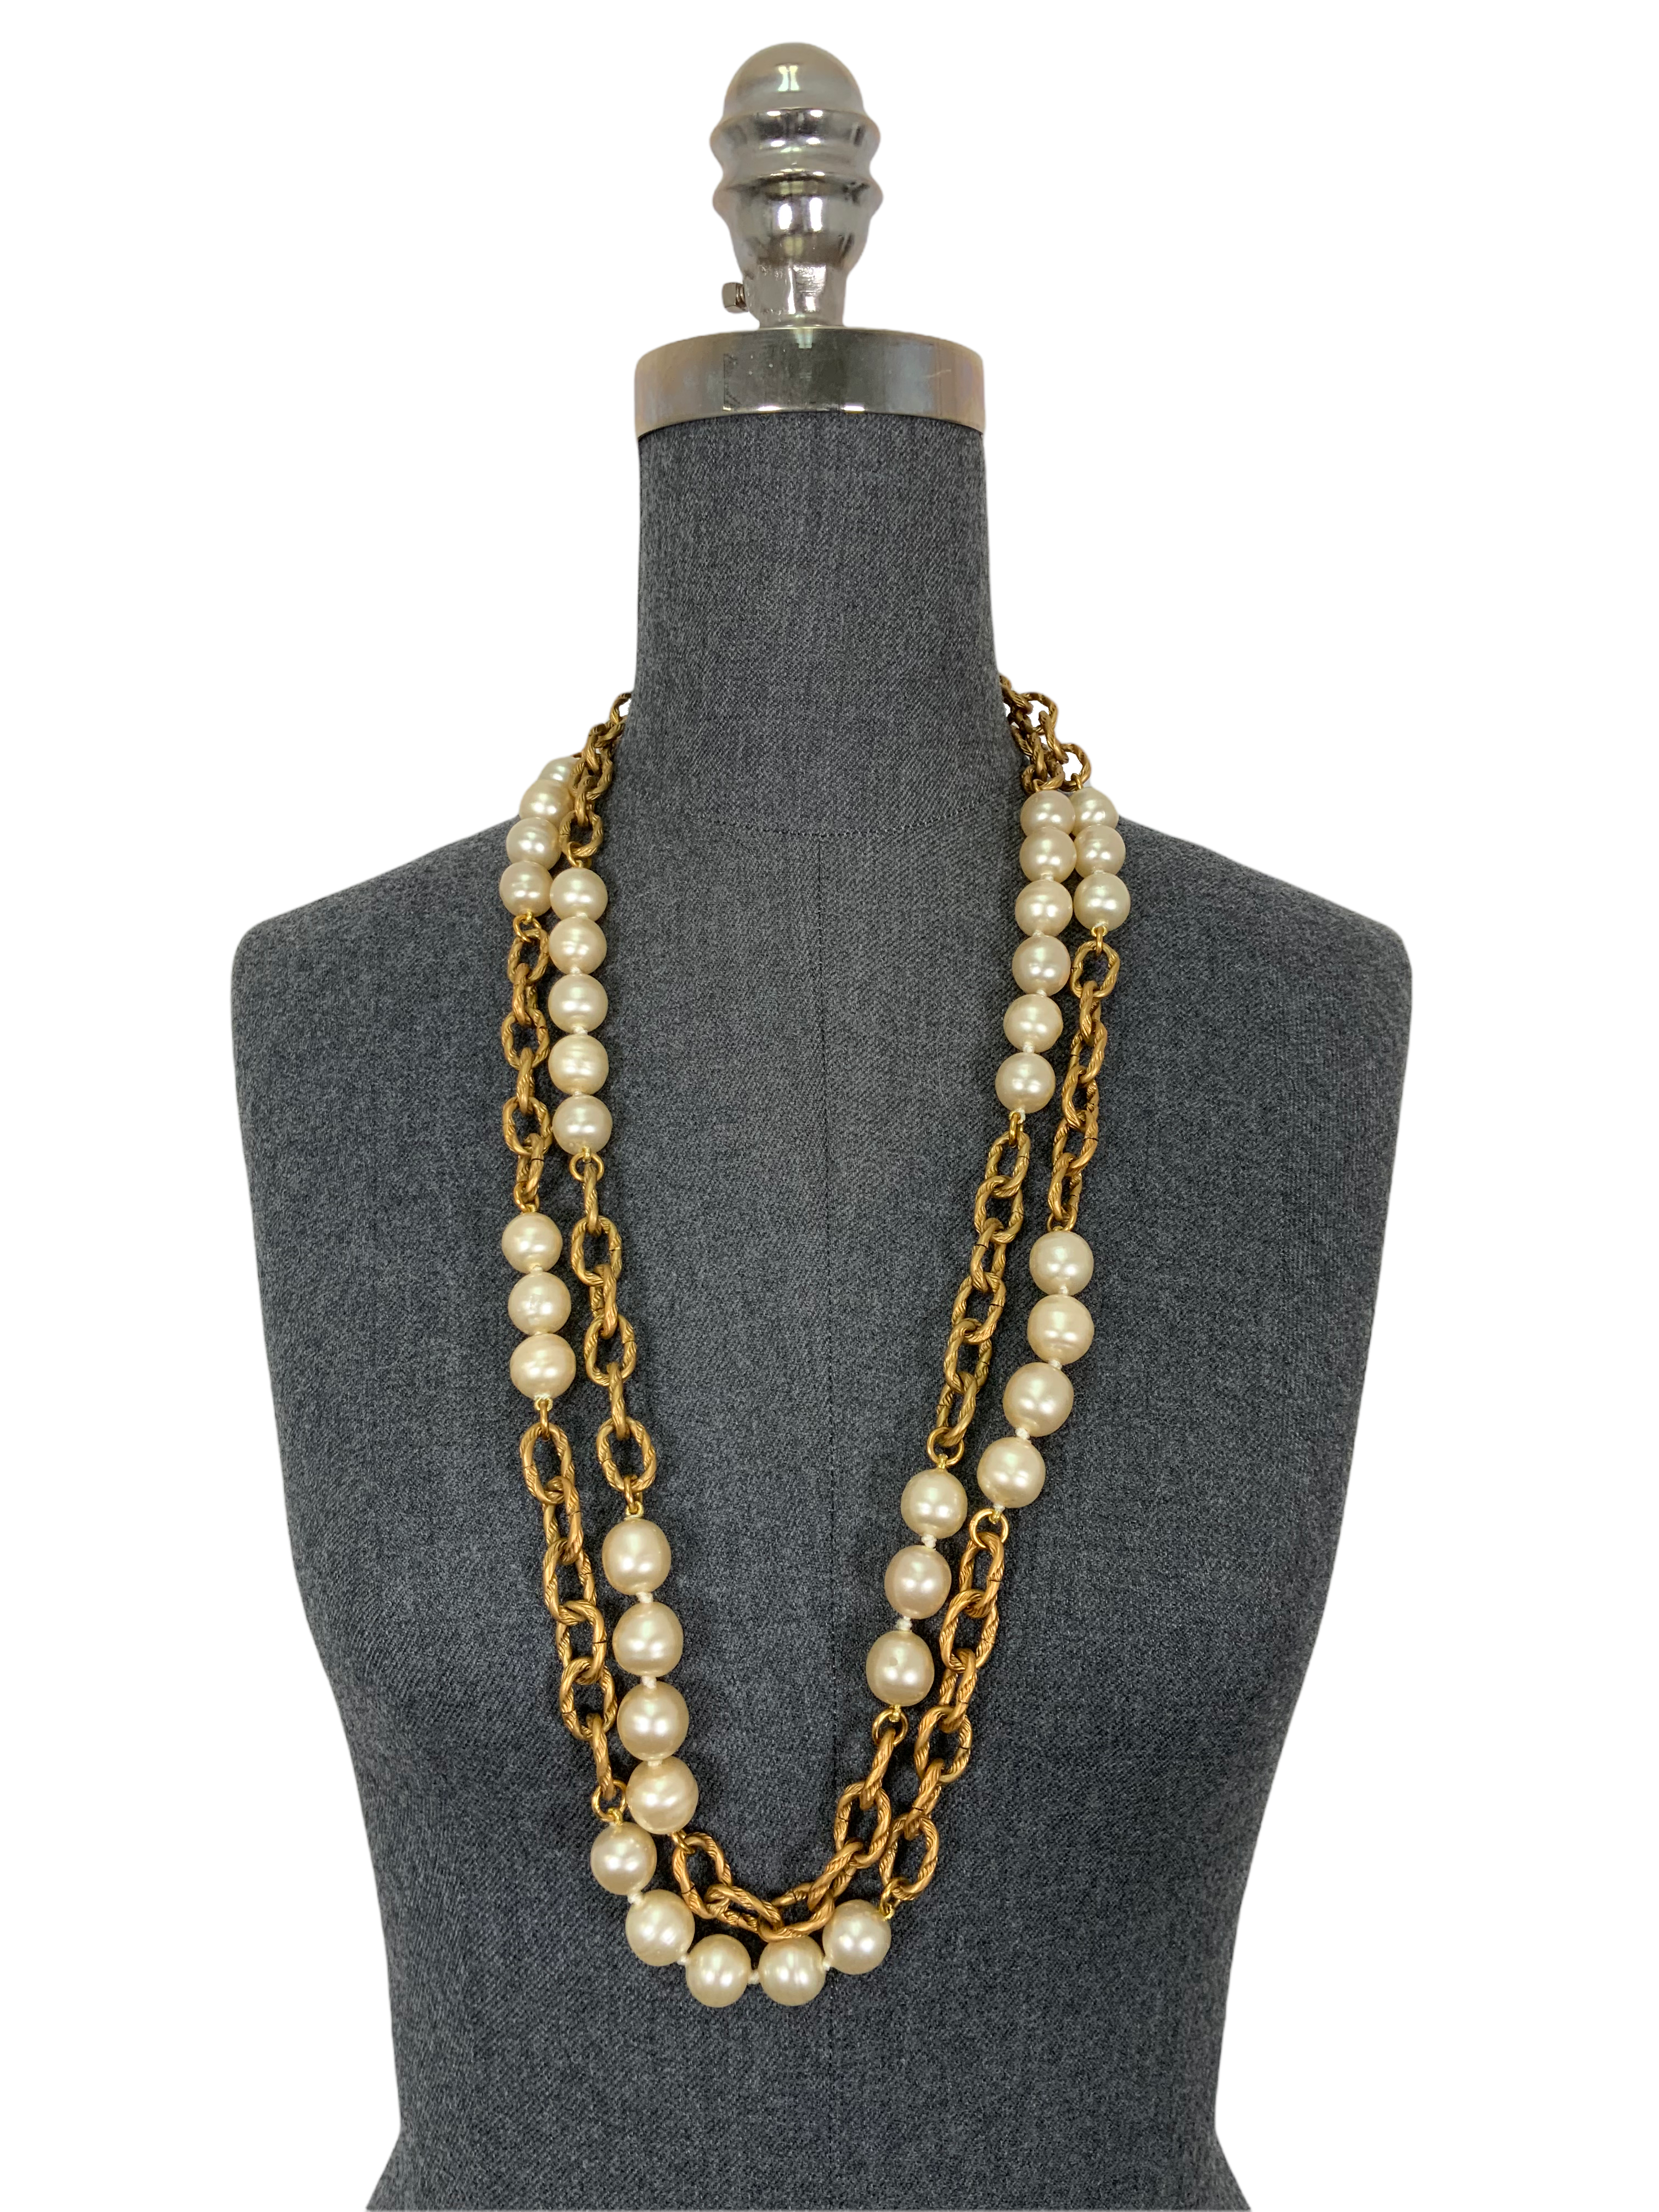 FWRD Renew Chanel Vintage CC Faux Pearl Necklace in Gold